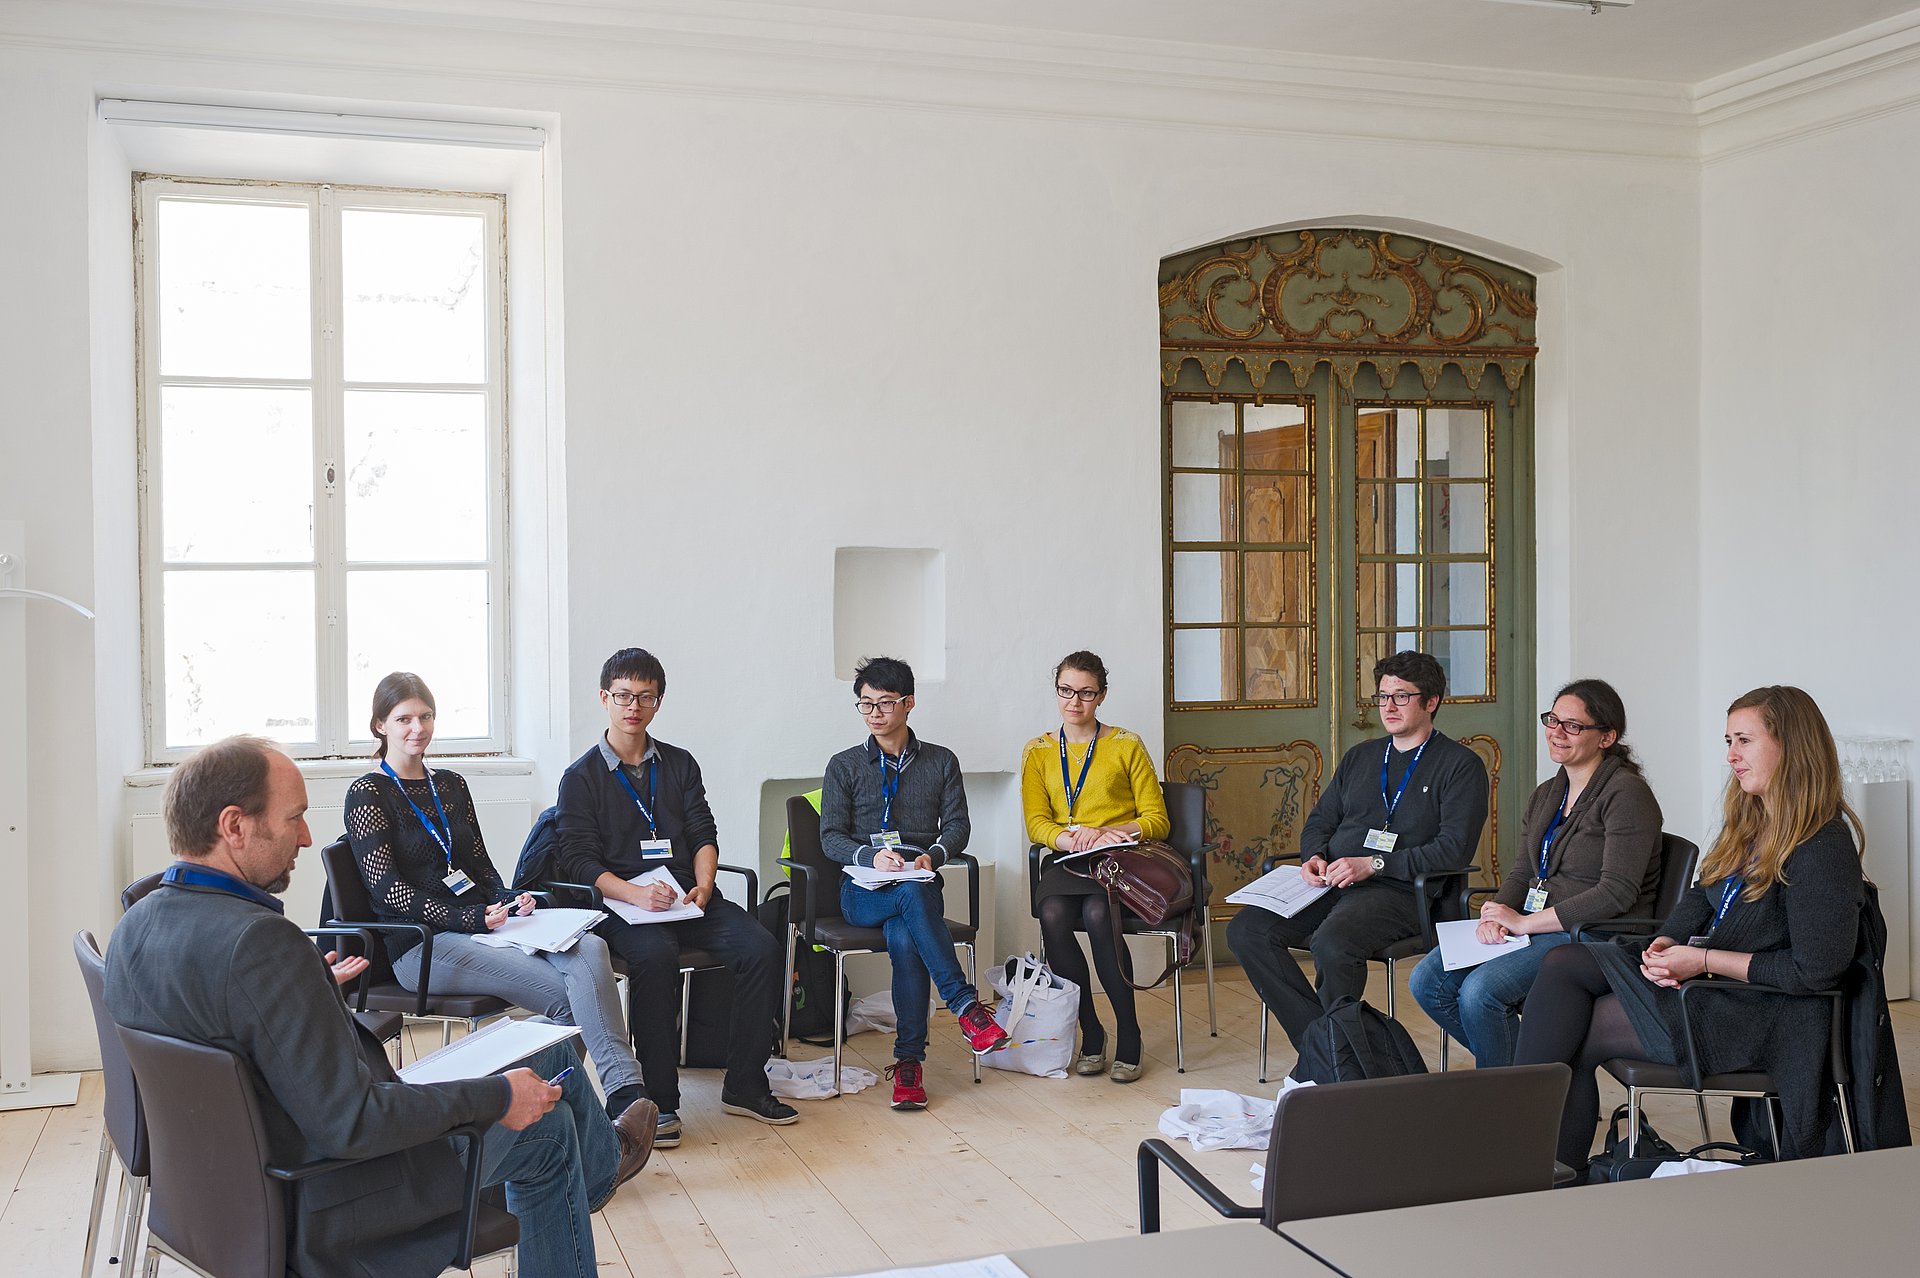 Doctoral candidates during a seminar.